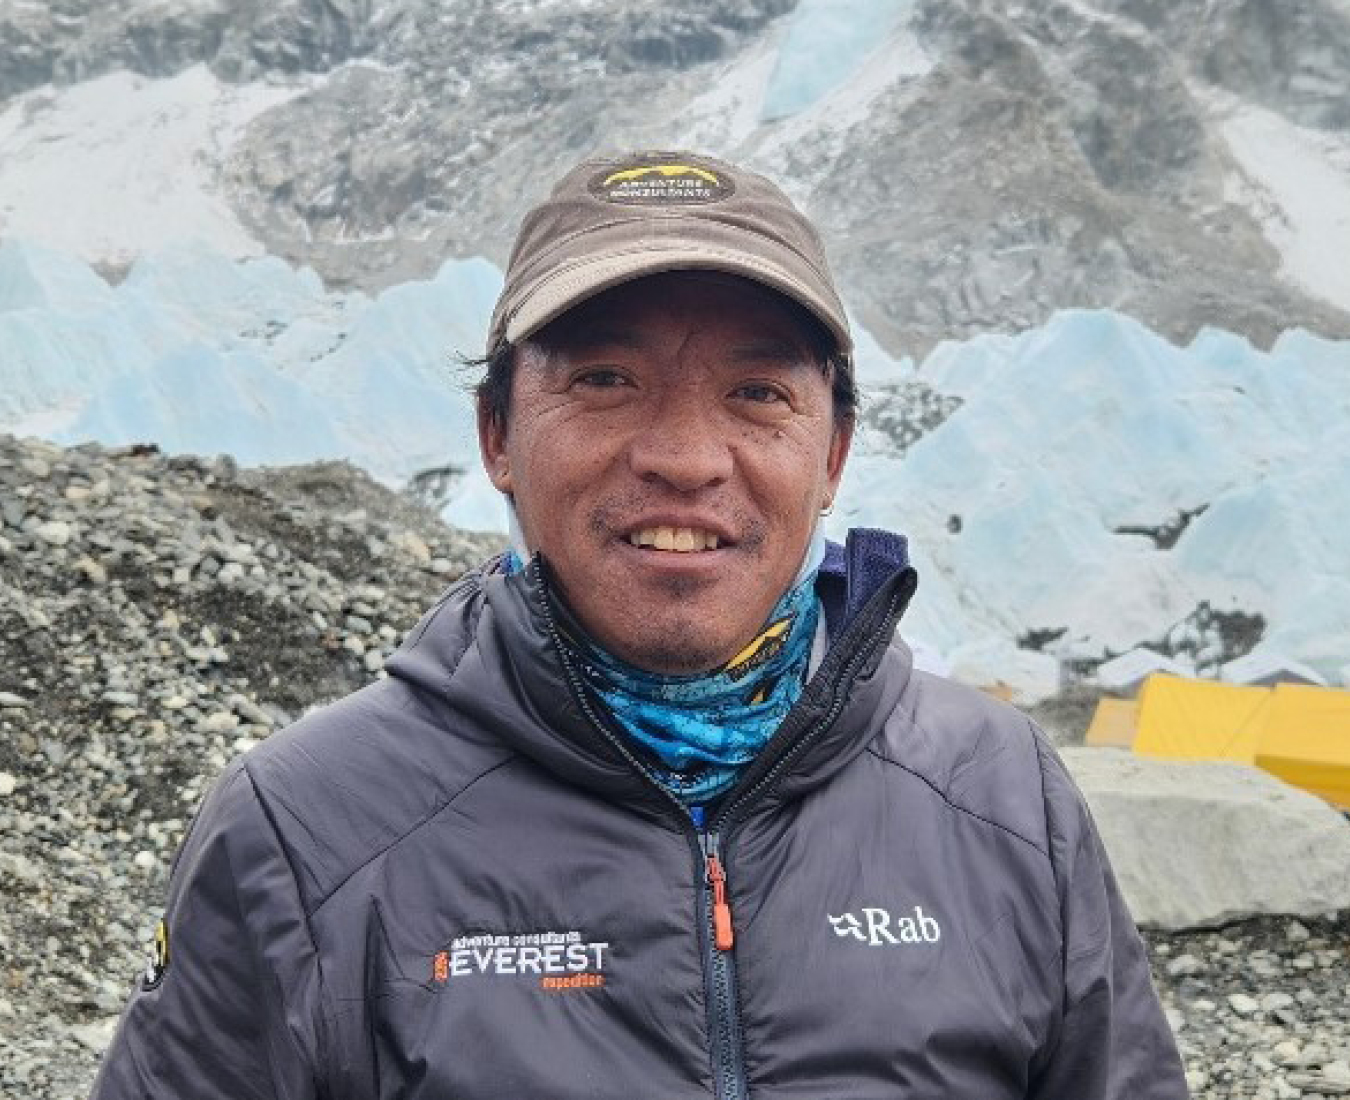 Passang Bhote, AC Climbing Sidar and 12 times Everest summiter at Everest Base Camp